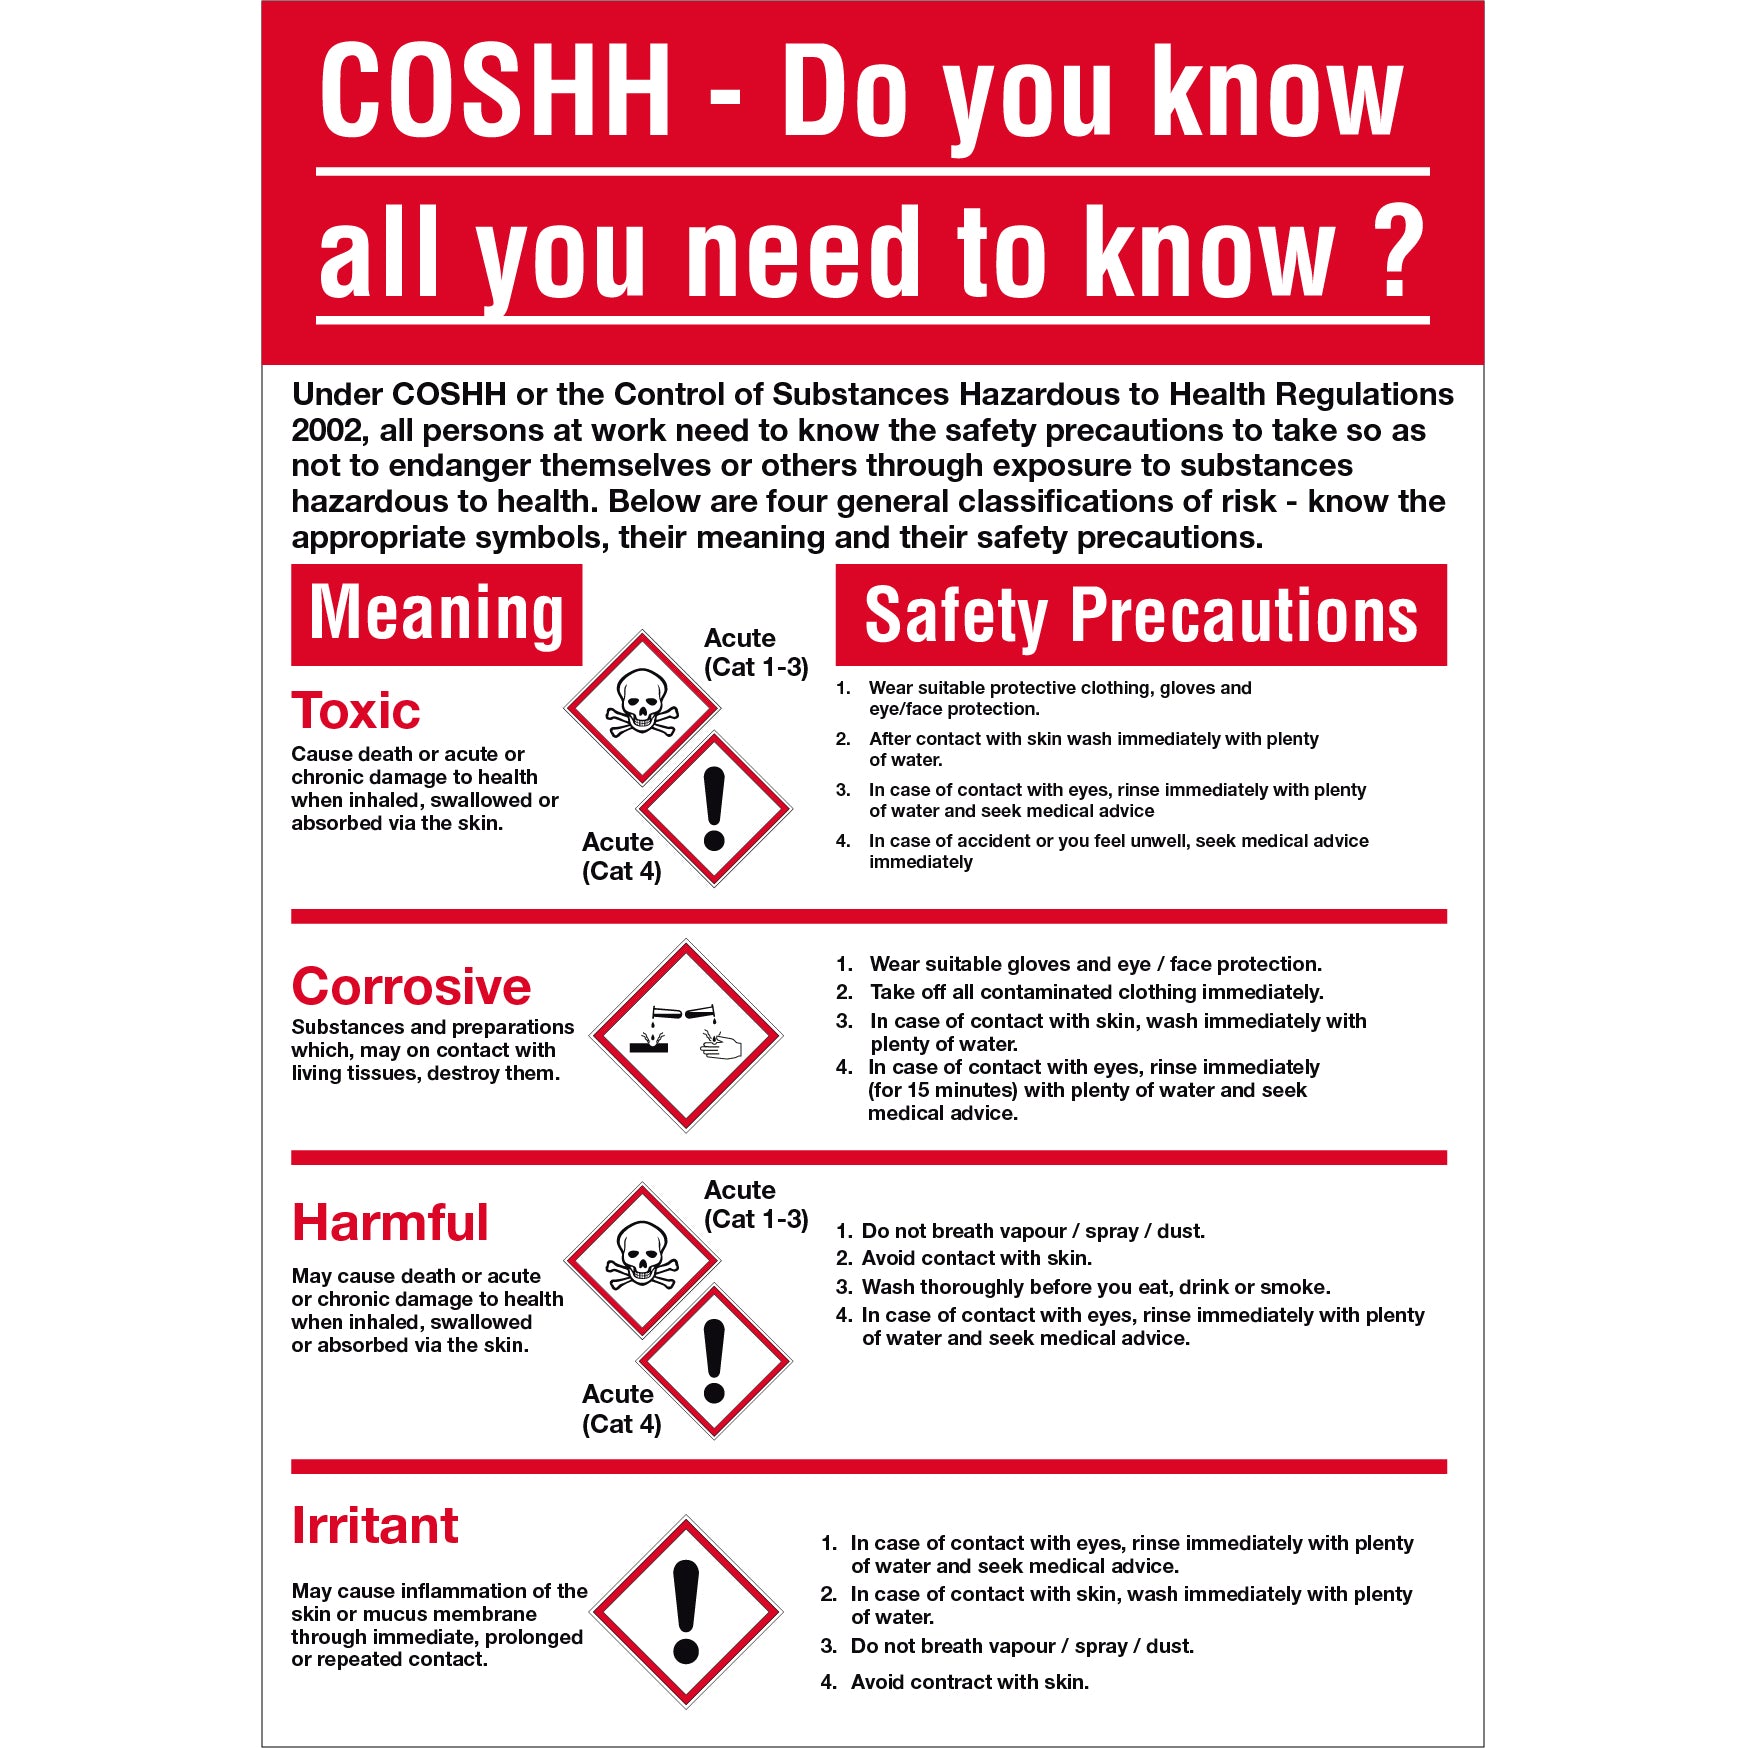 coshh-do-you-know-poster-first-safety-signs-first-safety-signs